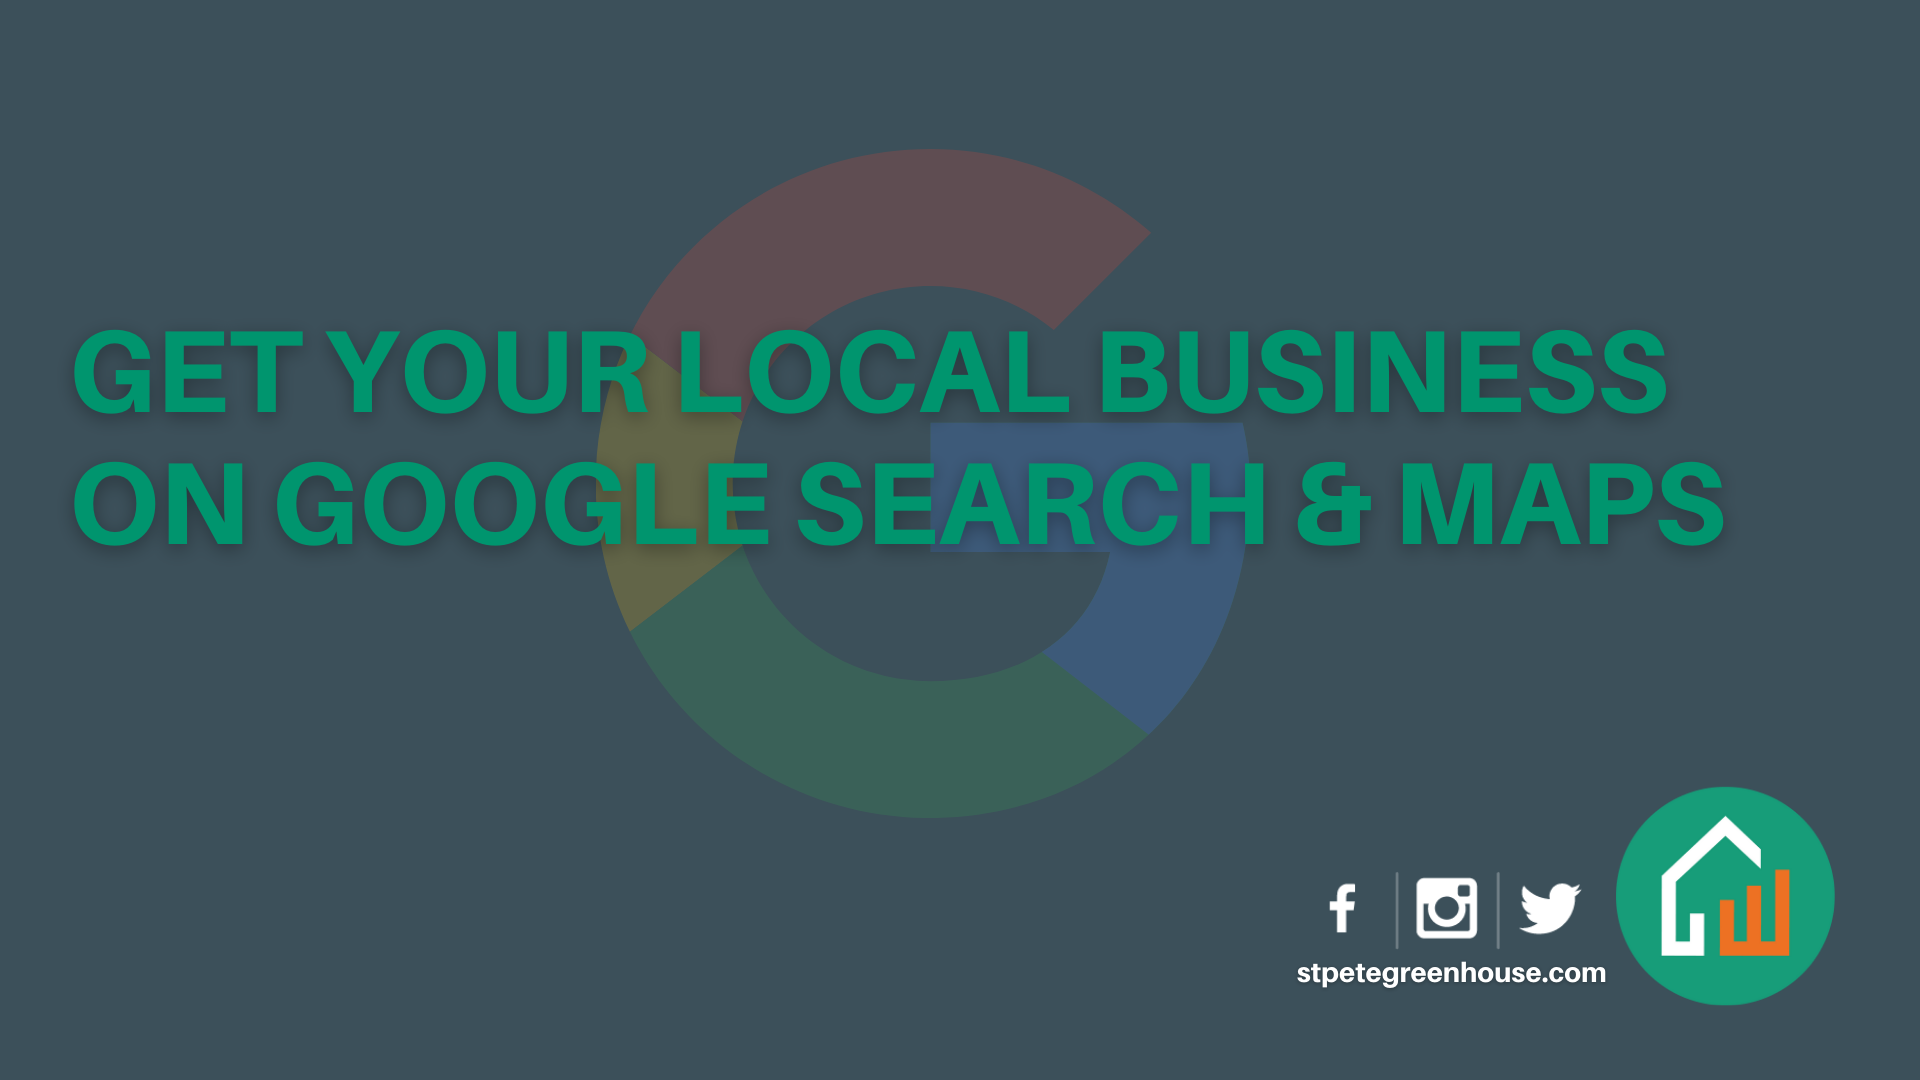 Get Your Local Business on Google Search & Maps-image